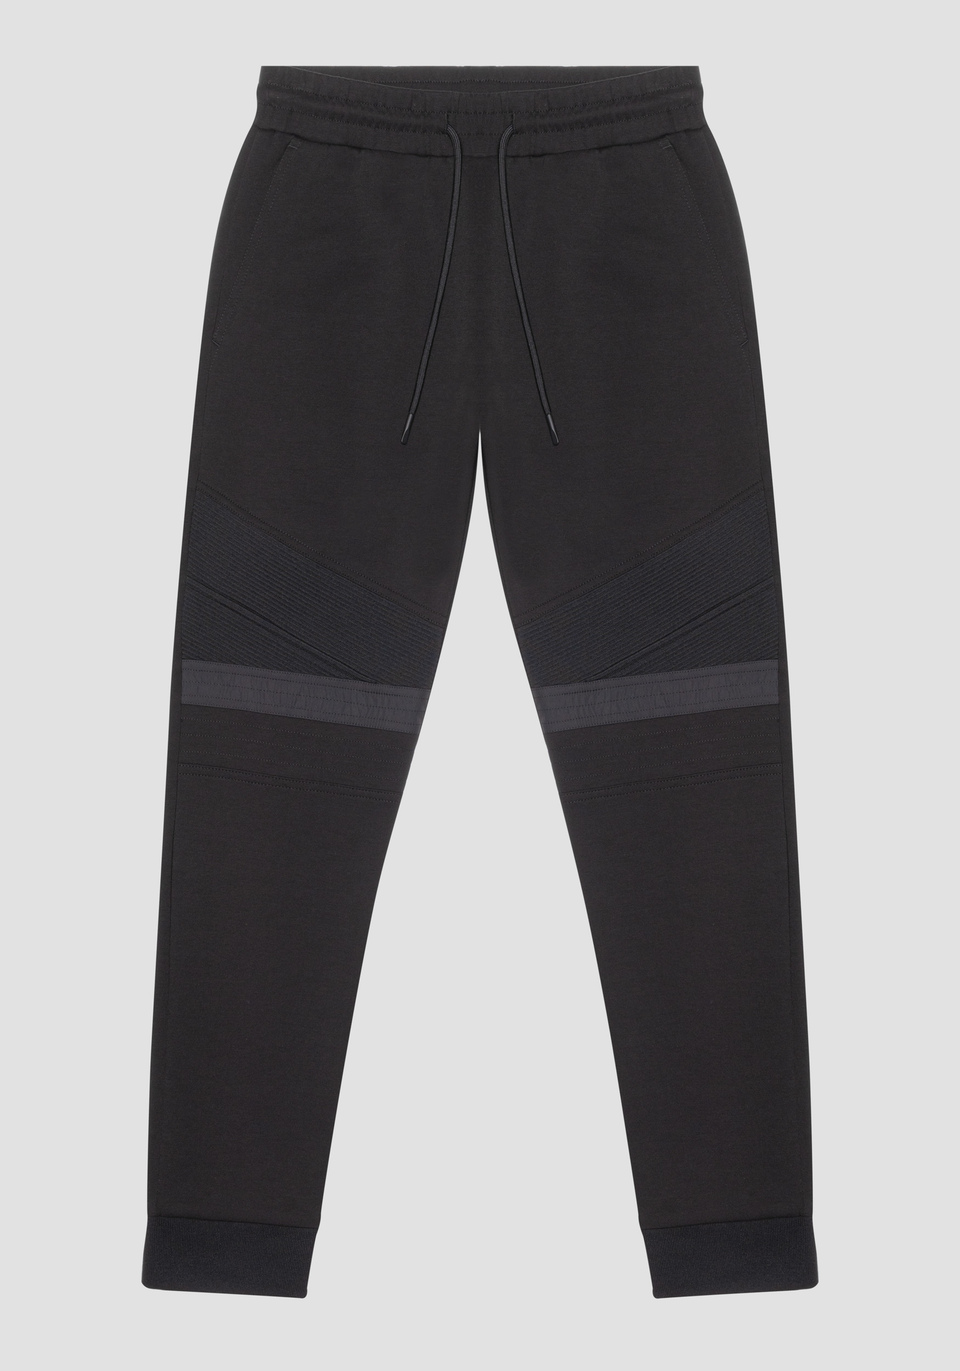 SUPER SLIM FIT TROUSERS IN COTTON BLEND FABRIC WITH CONTRAST IN NYLON SHIOZE - Antony Morato Online Shop